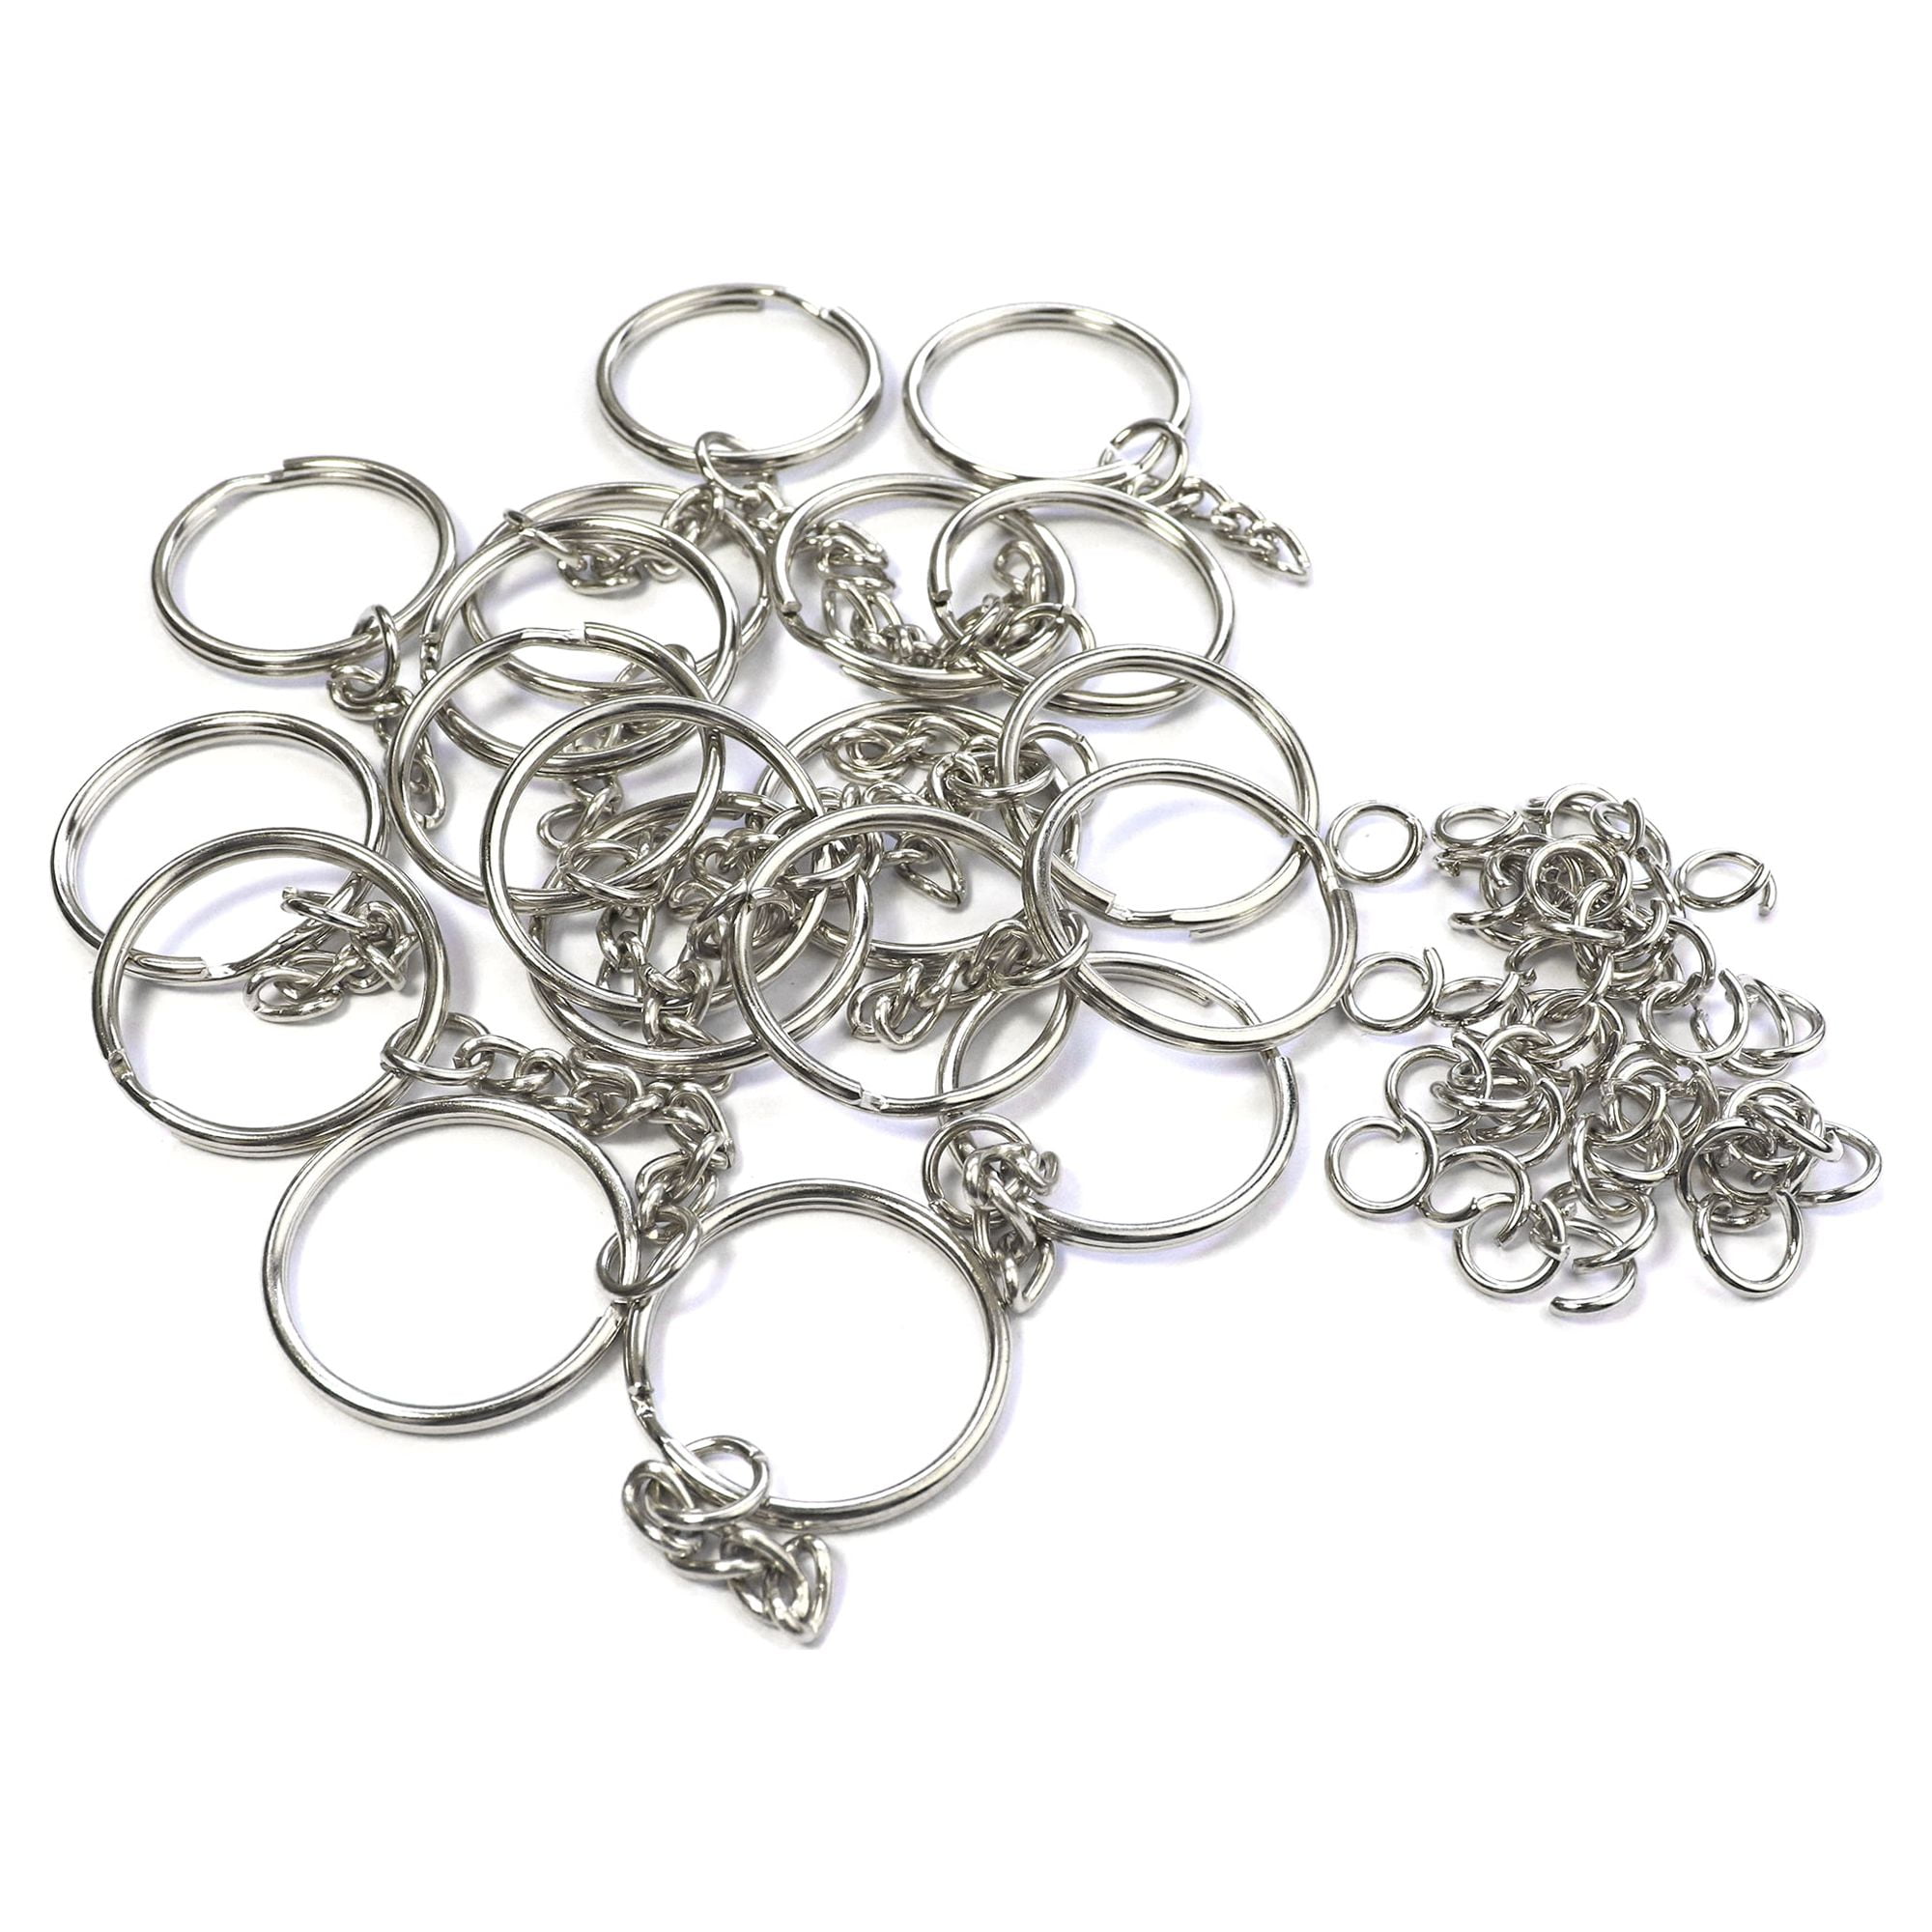 KINJOEK 400 PCS 1 Inch 25mm Key Chain Rings, Metal Split Keychain Ring  Parts Nickel Plated Chain Silver Key Ring with Open Jump Ring, Connector